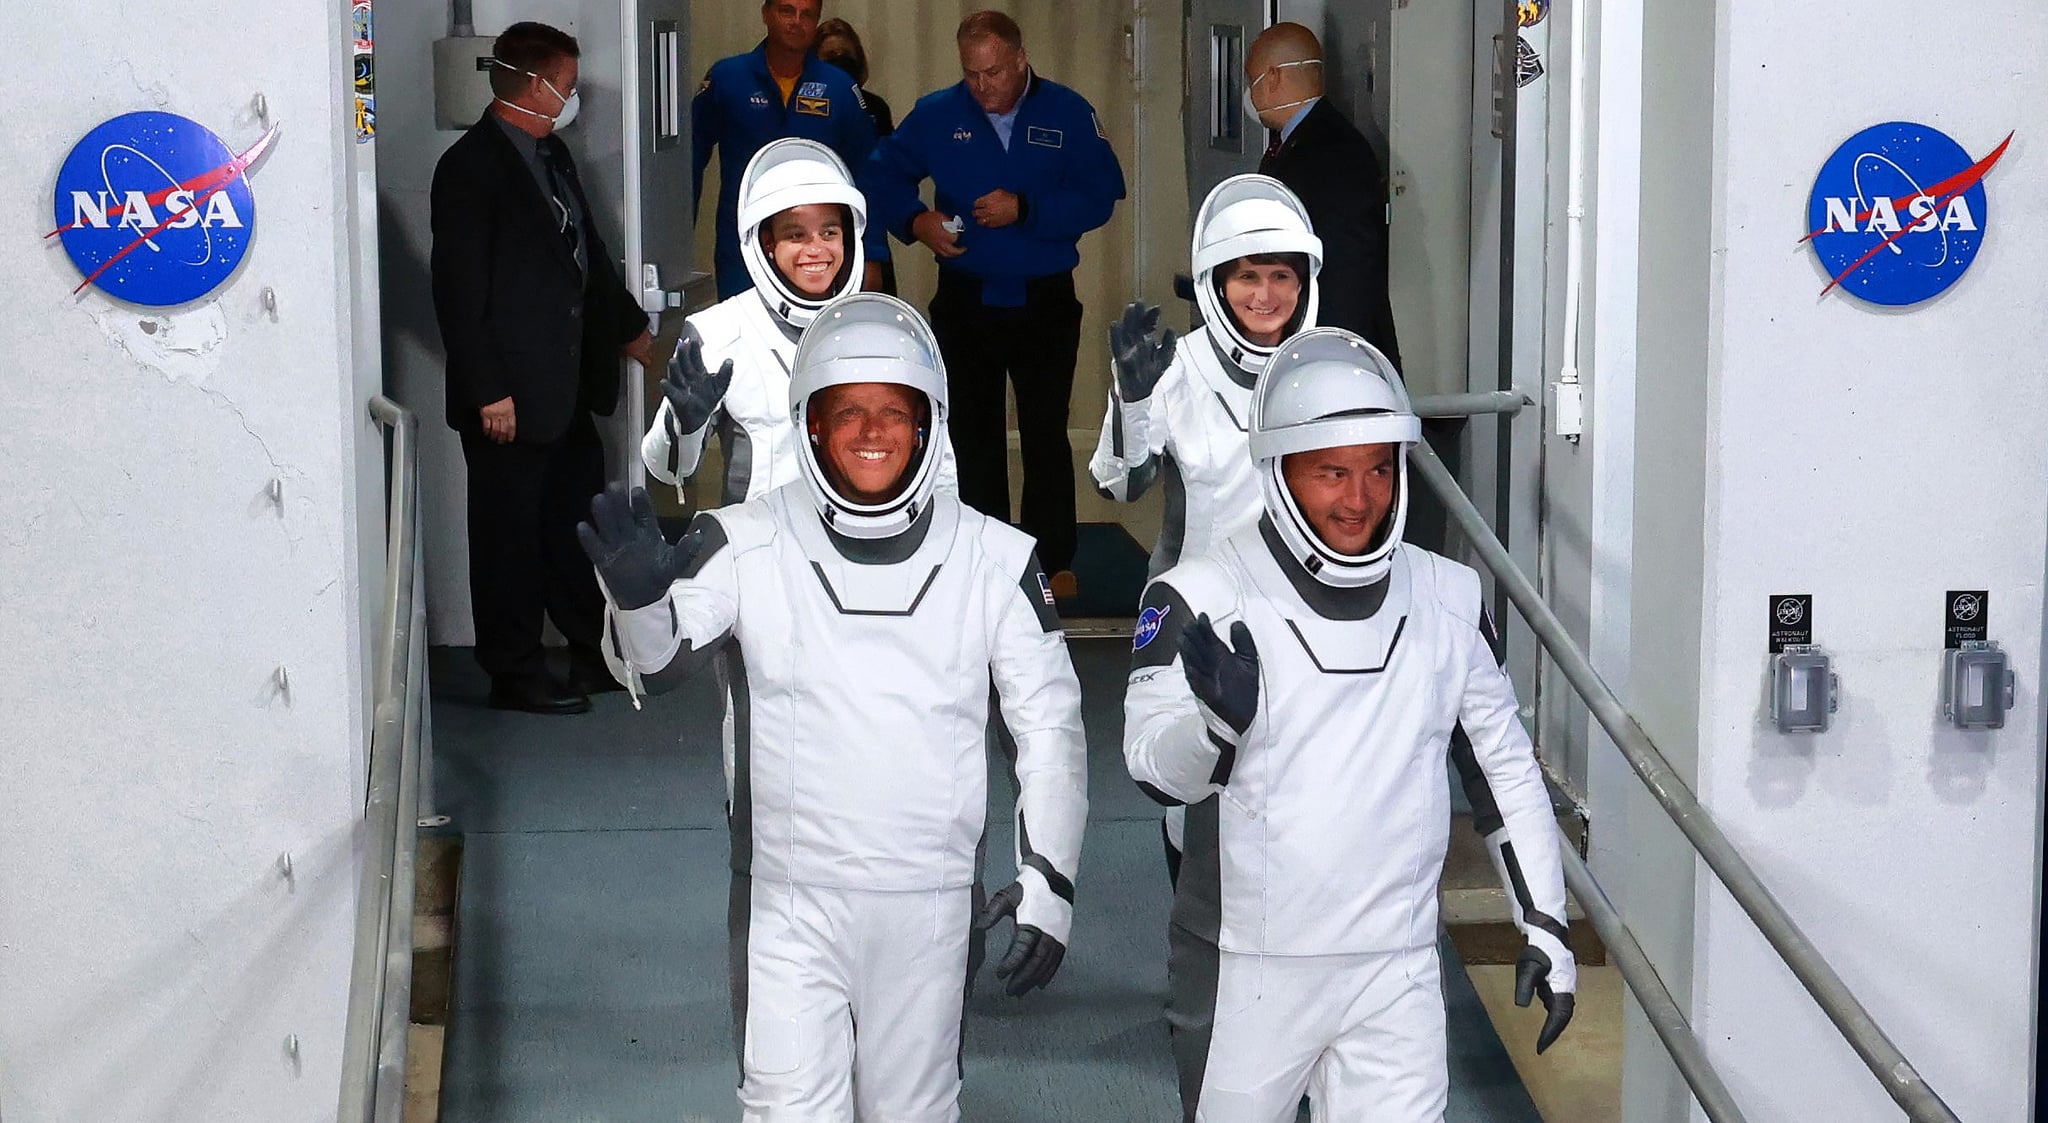 The astronauts of the NASA Crew-4 mission head to Launch Complex 39-A to prepare for liftoff to the International Space Station onboard a SpaceX Falcon 9 rocket from Kennedy Space Centre, Florida, Wednesday, April 27, 2022. From left, NASA astronauts Jessica Watkins and Robert Hines; ESA astronaut Samantha Cristoforetti; and NASA astronaut Kjell Lindgren. (Joe Burbank/Orlando Sentinel/Tribune News Service via Getty Images)